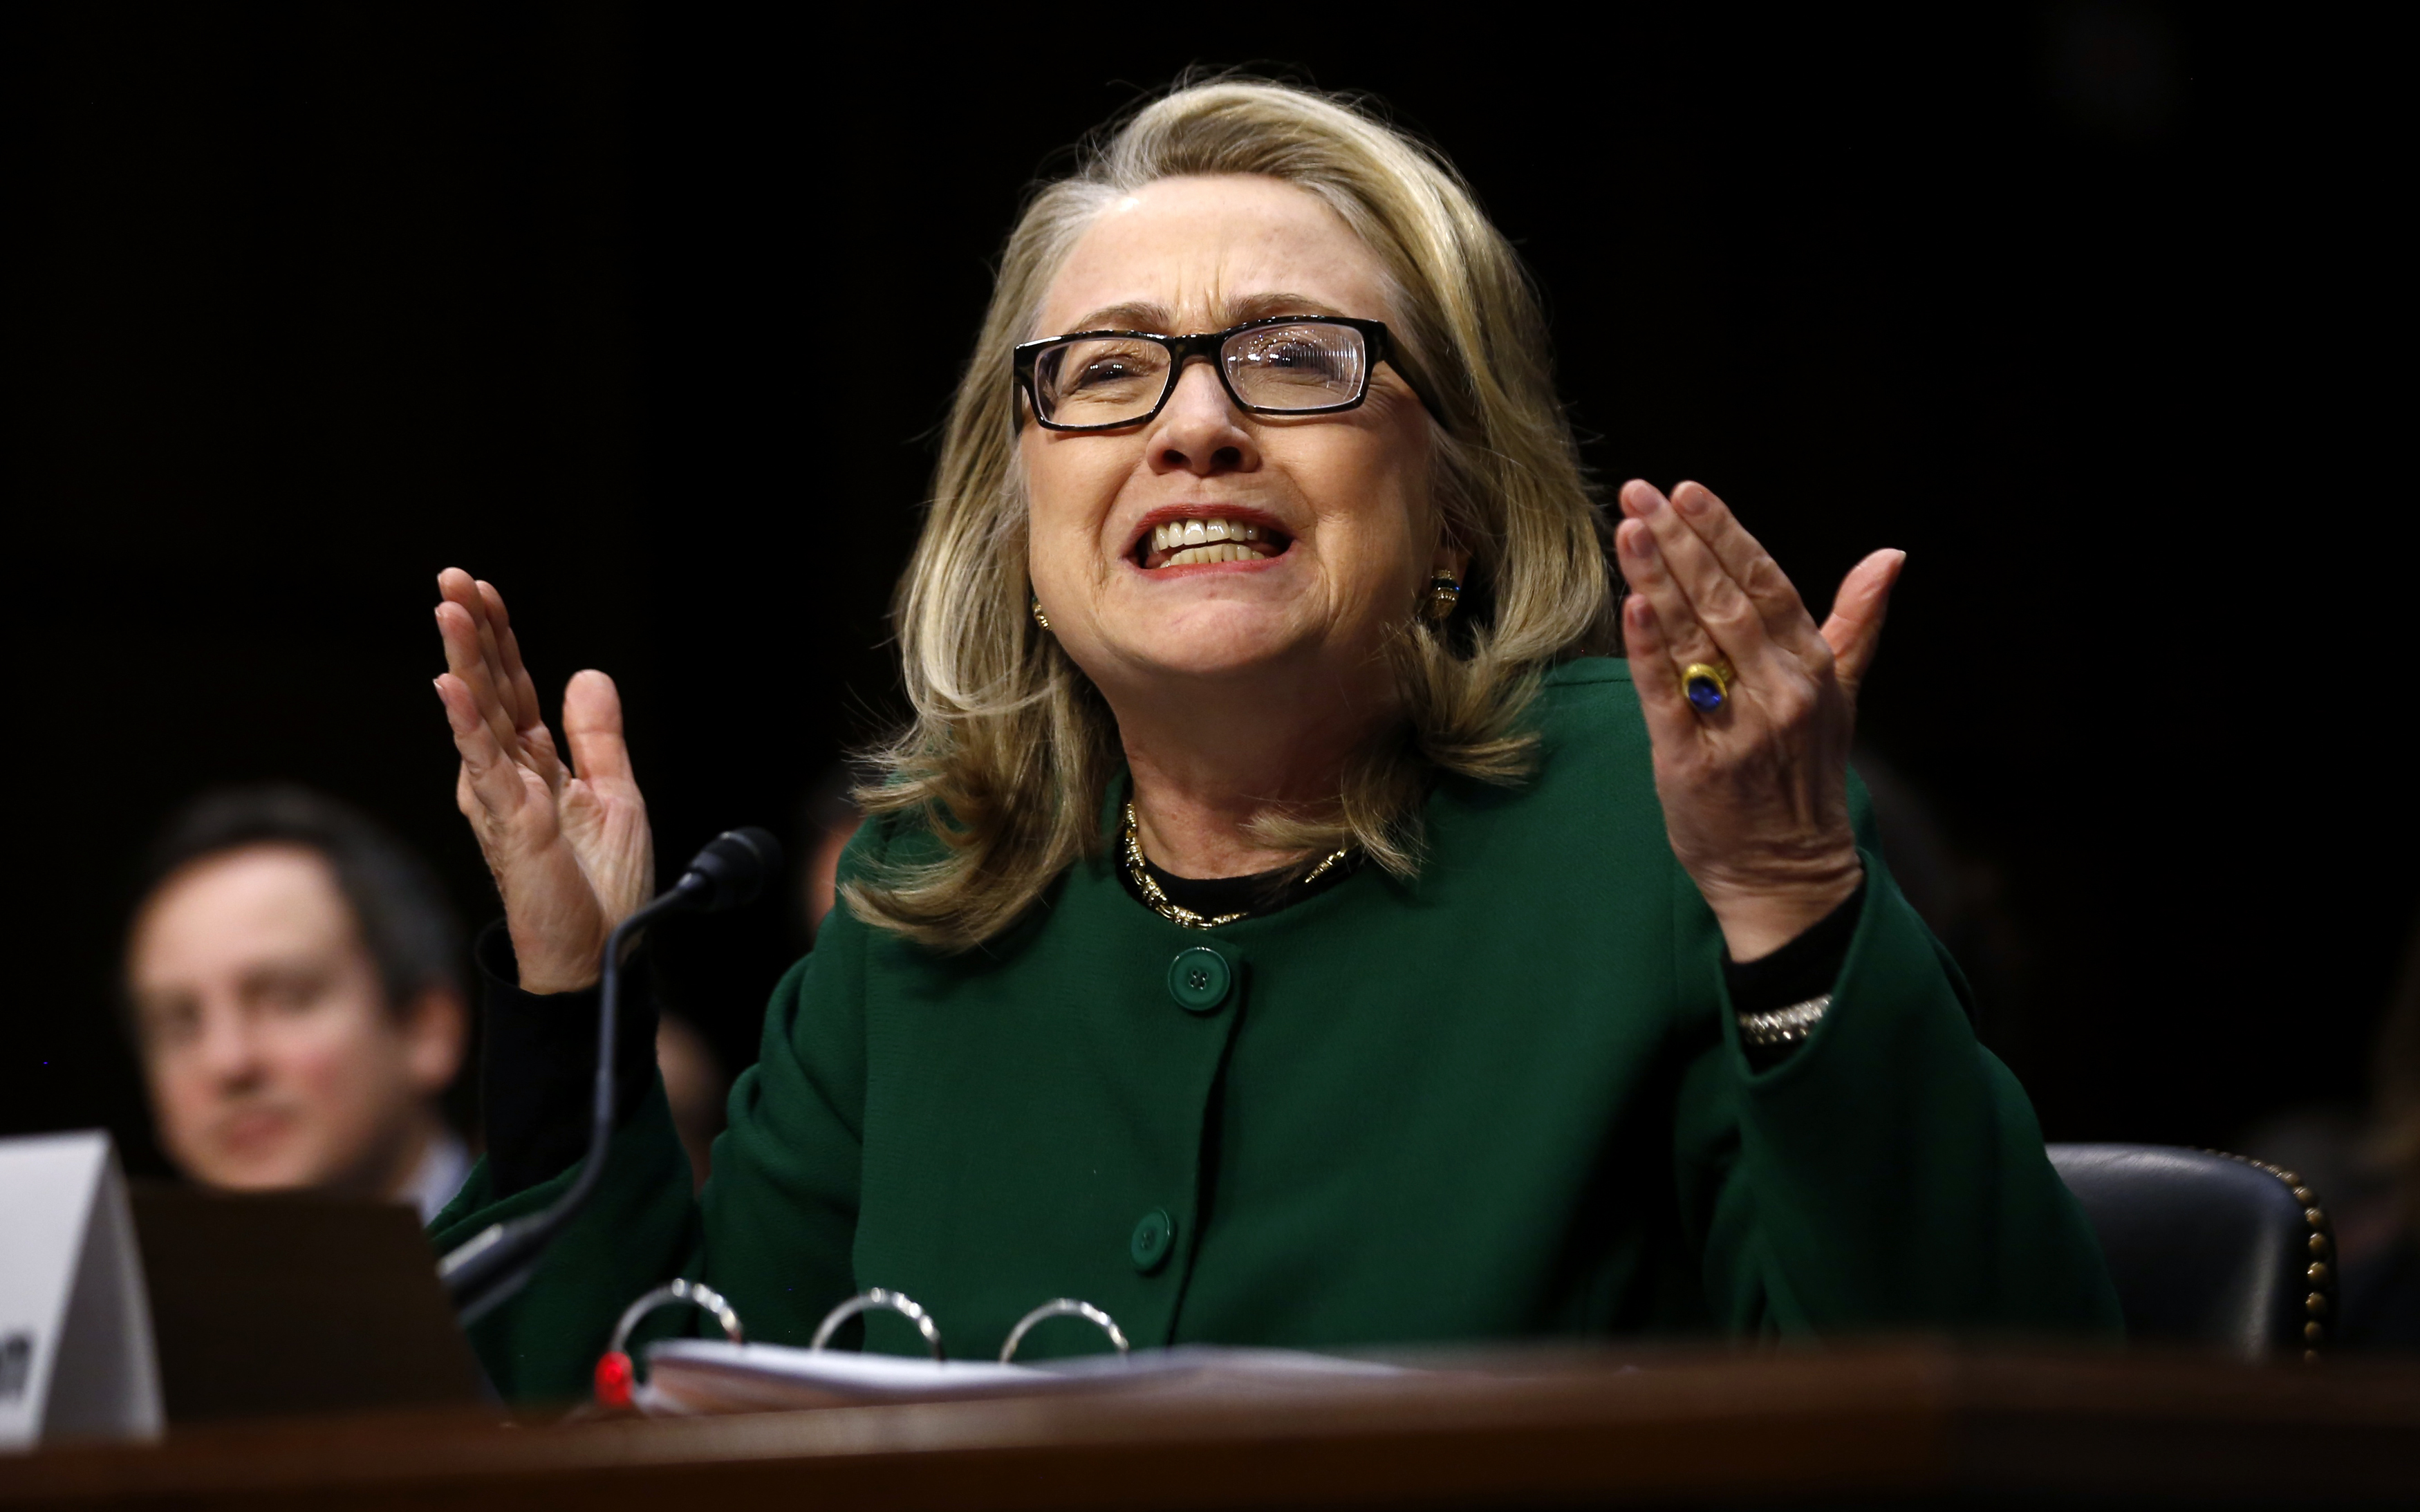 U.S. Secretary of State Hillary Clinton responds forcefully to intense questioning on the September attacks on U.S. diplomatic sites in Benghazi, Libya, during a Senate Foreign Relations Committee hearing on Capitol Hill in Washington January 23, 2013. REUTERS/Jason Reed